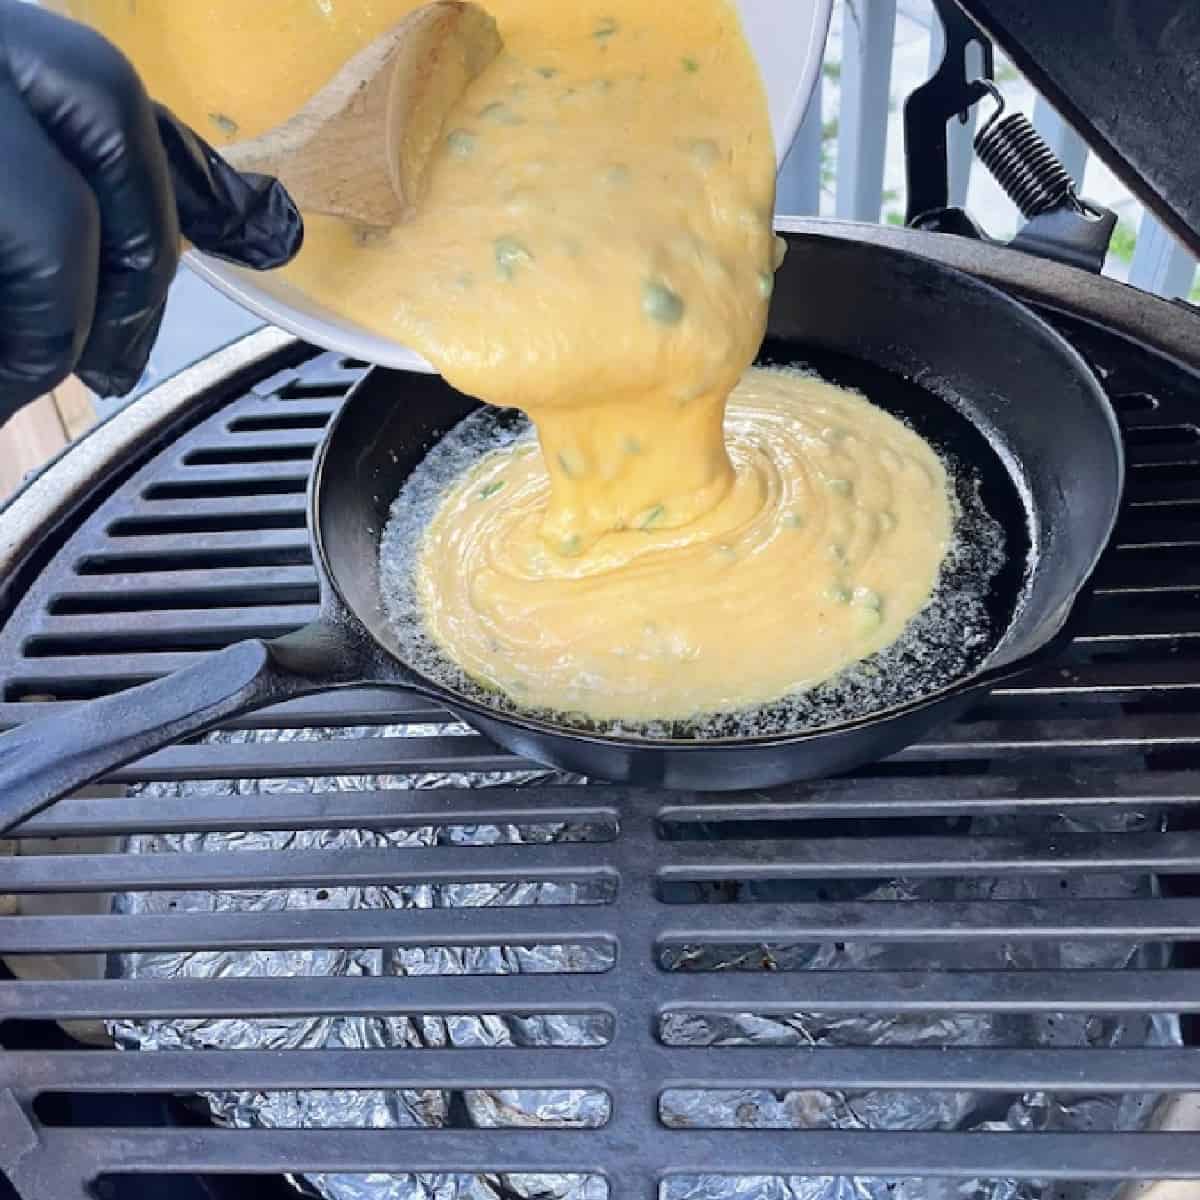 jalapeno cornbread mix being pouring into cast iron skillet on grill